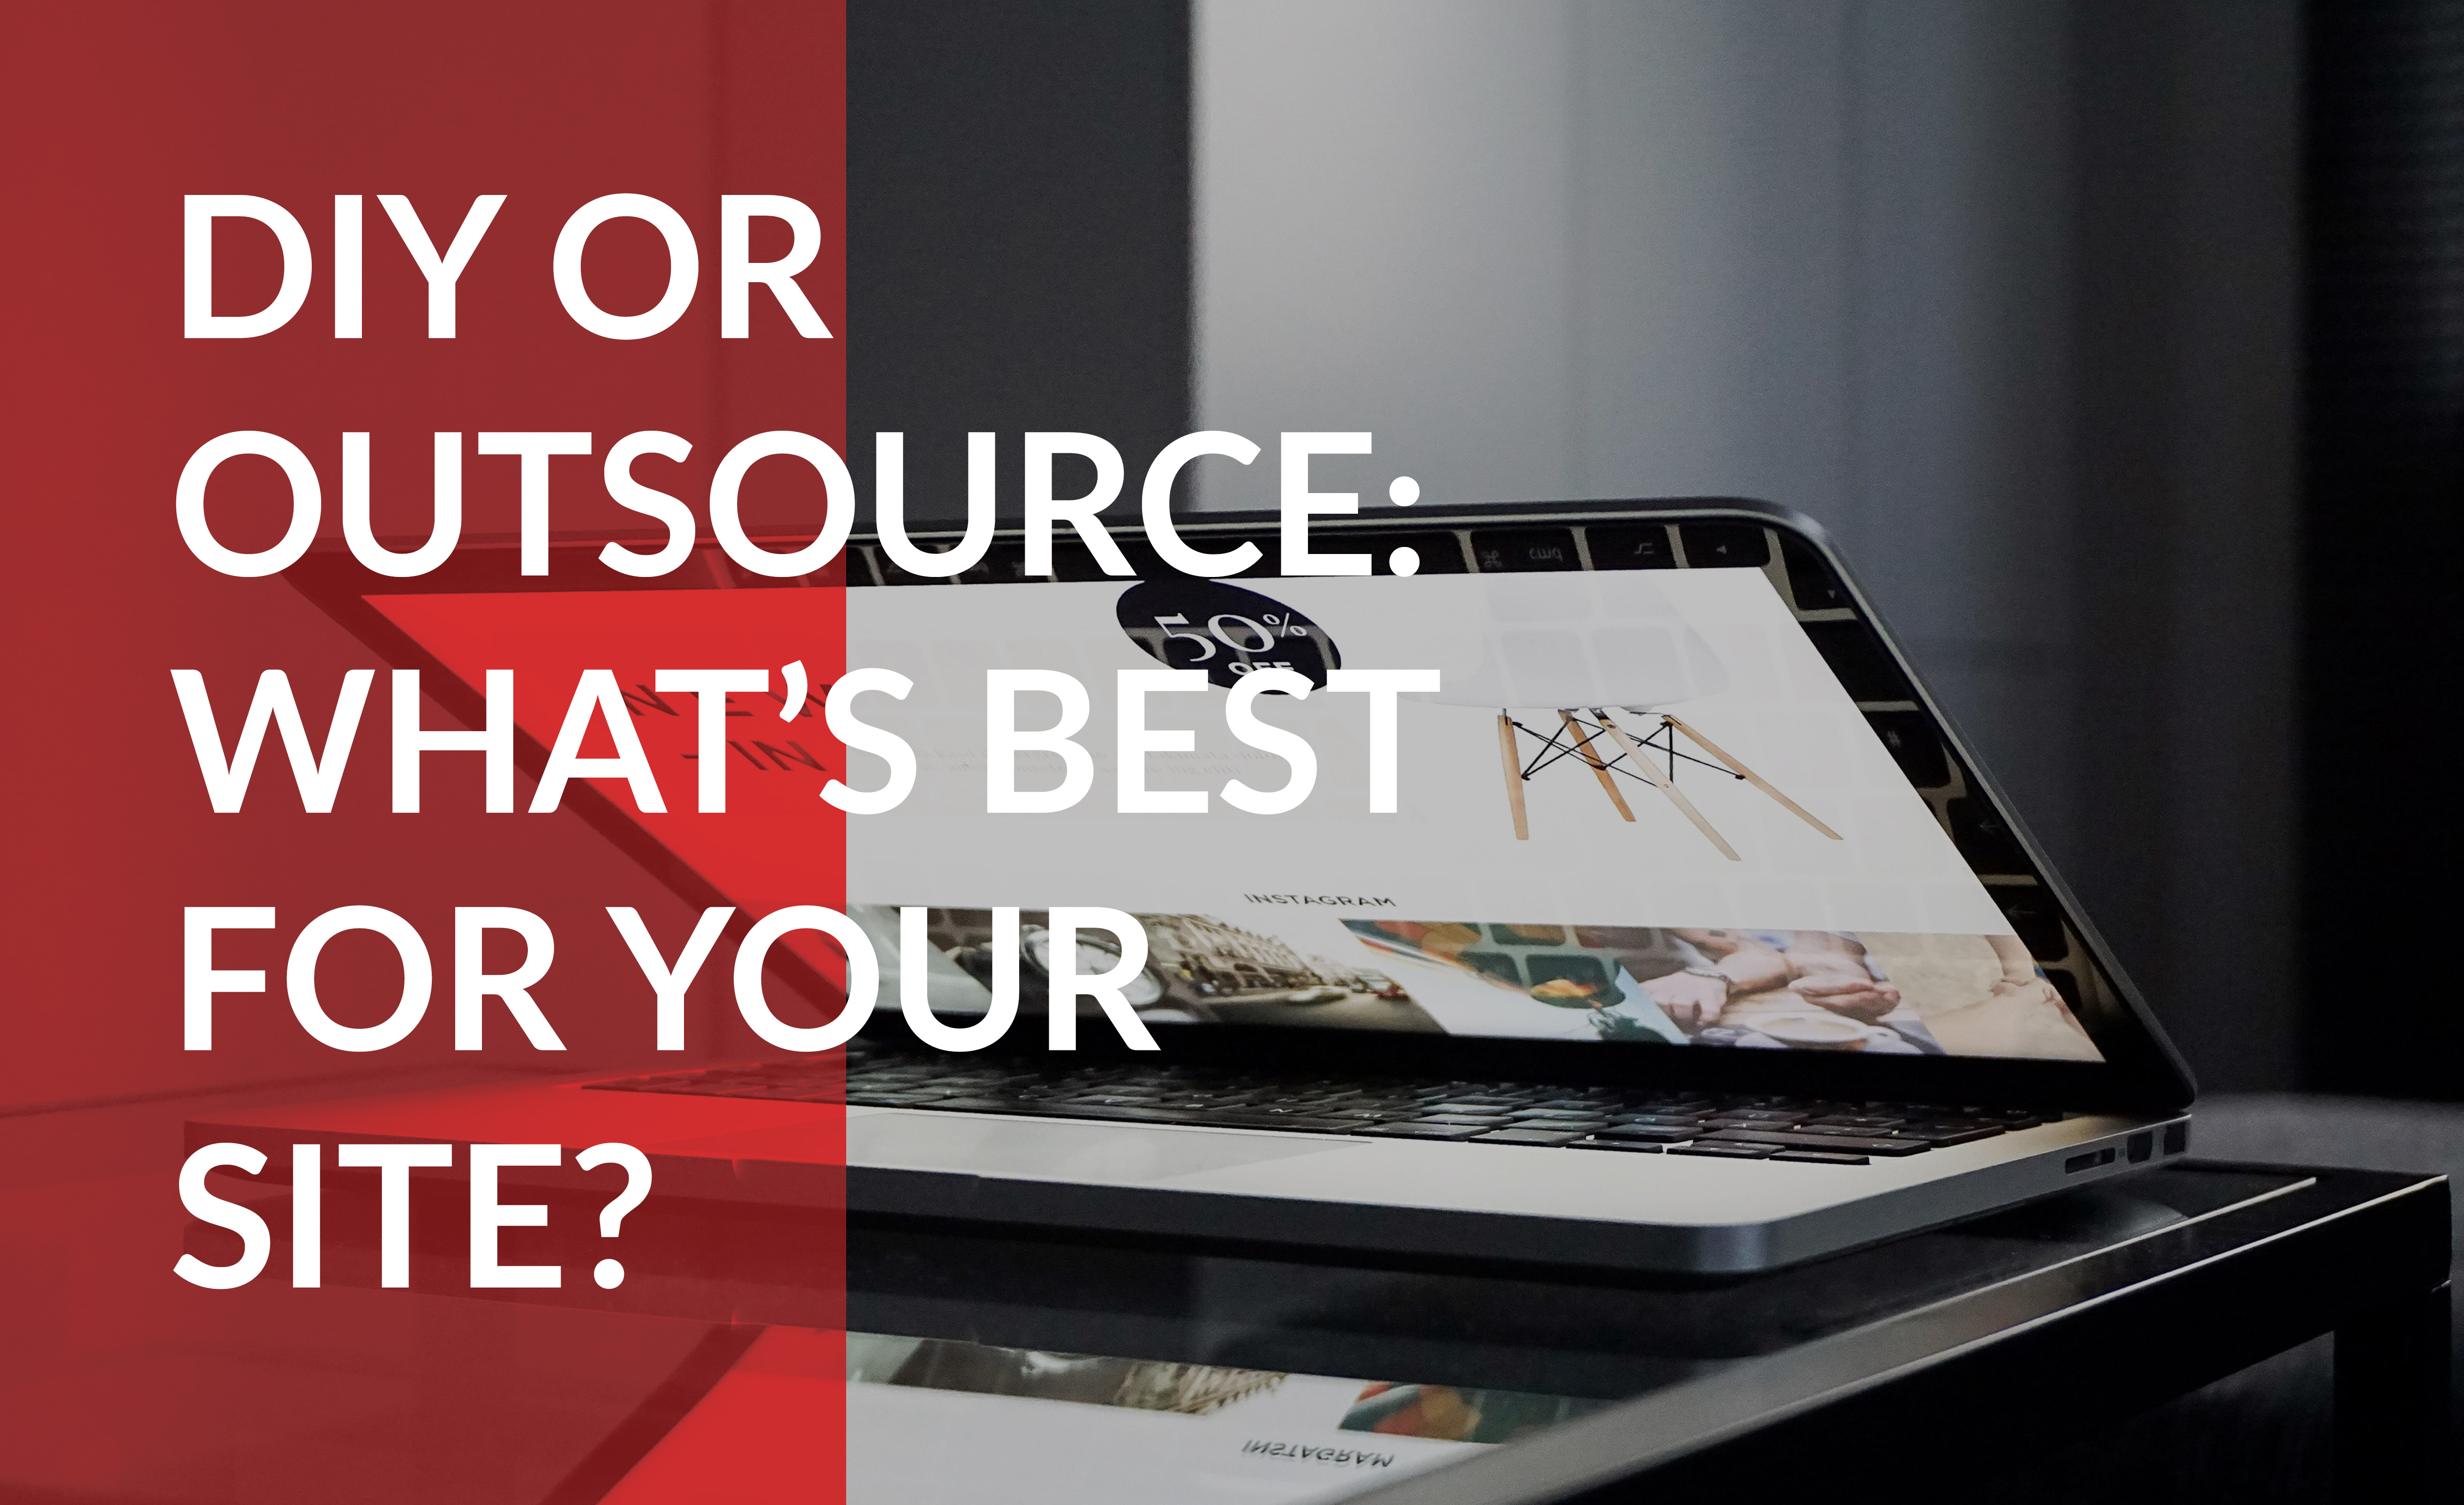 DIY or Outsource: What's best for your site?